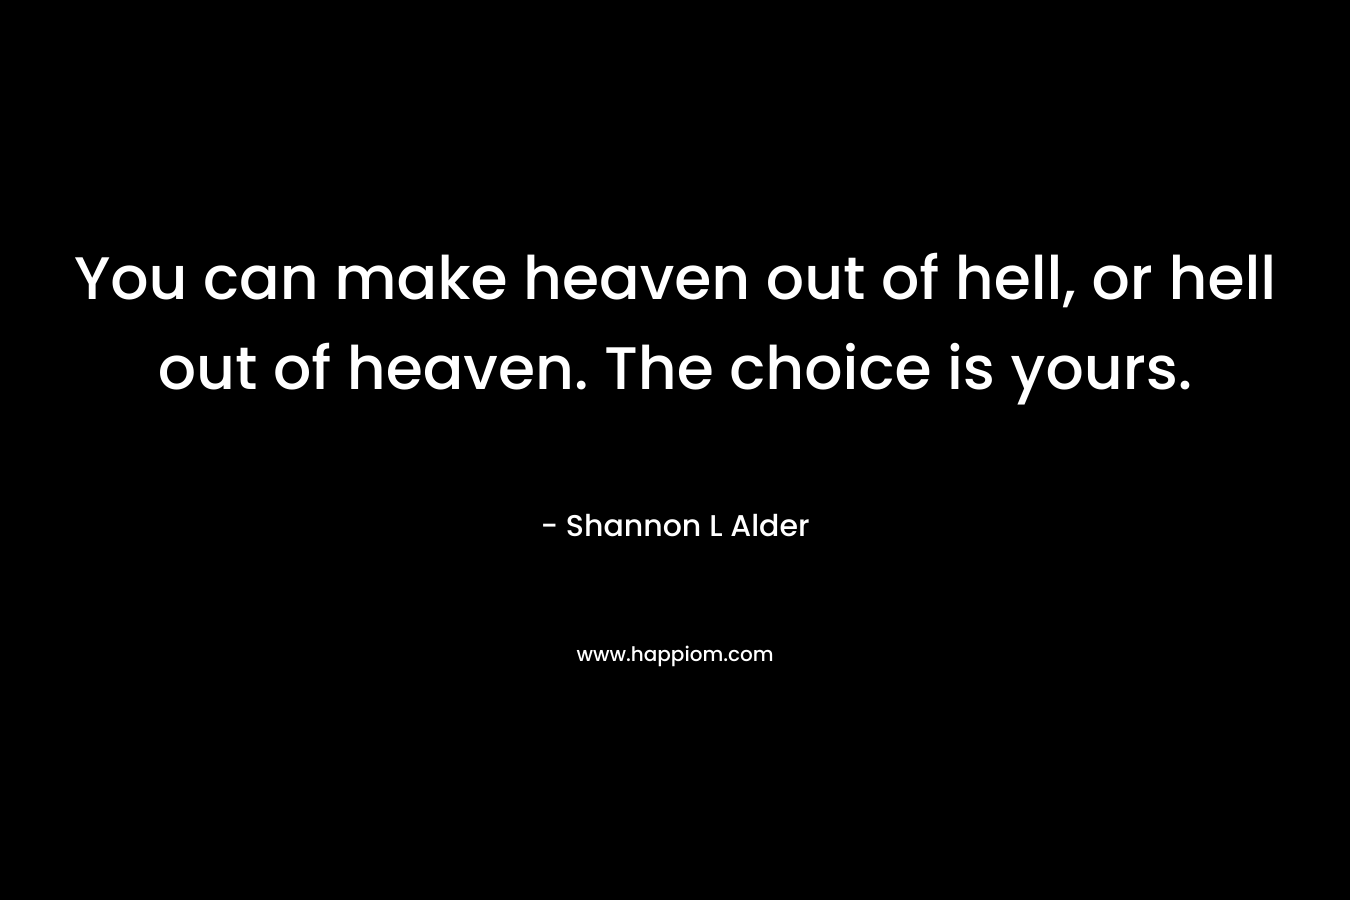 You can make heaven out of hell, or hell out of heaven. The choice is yours.